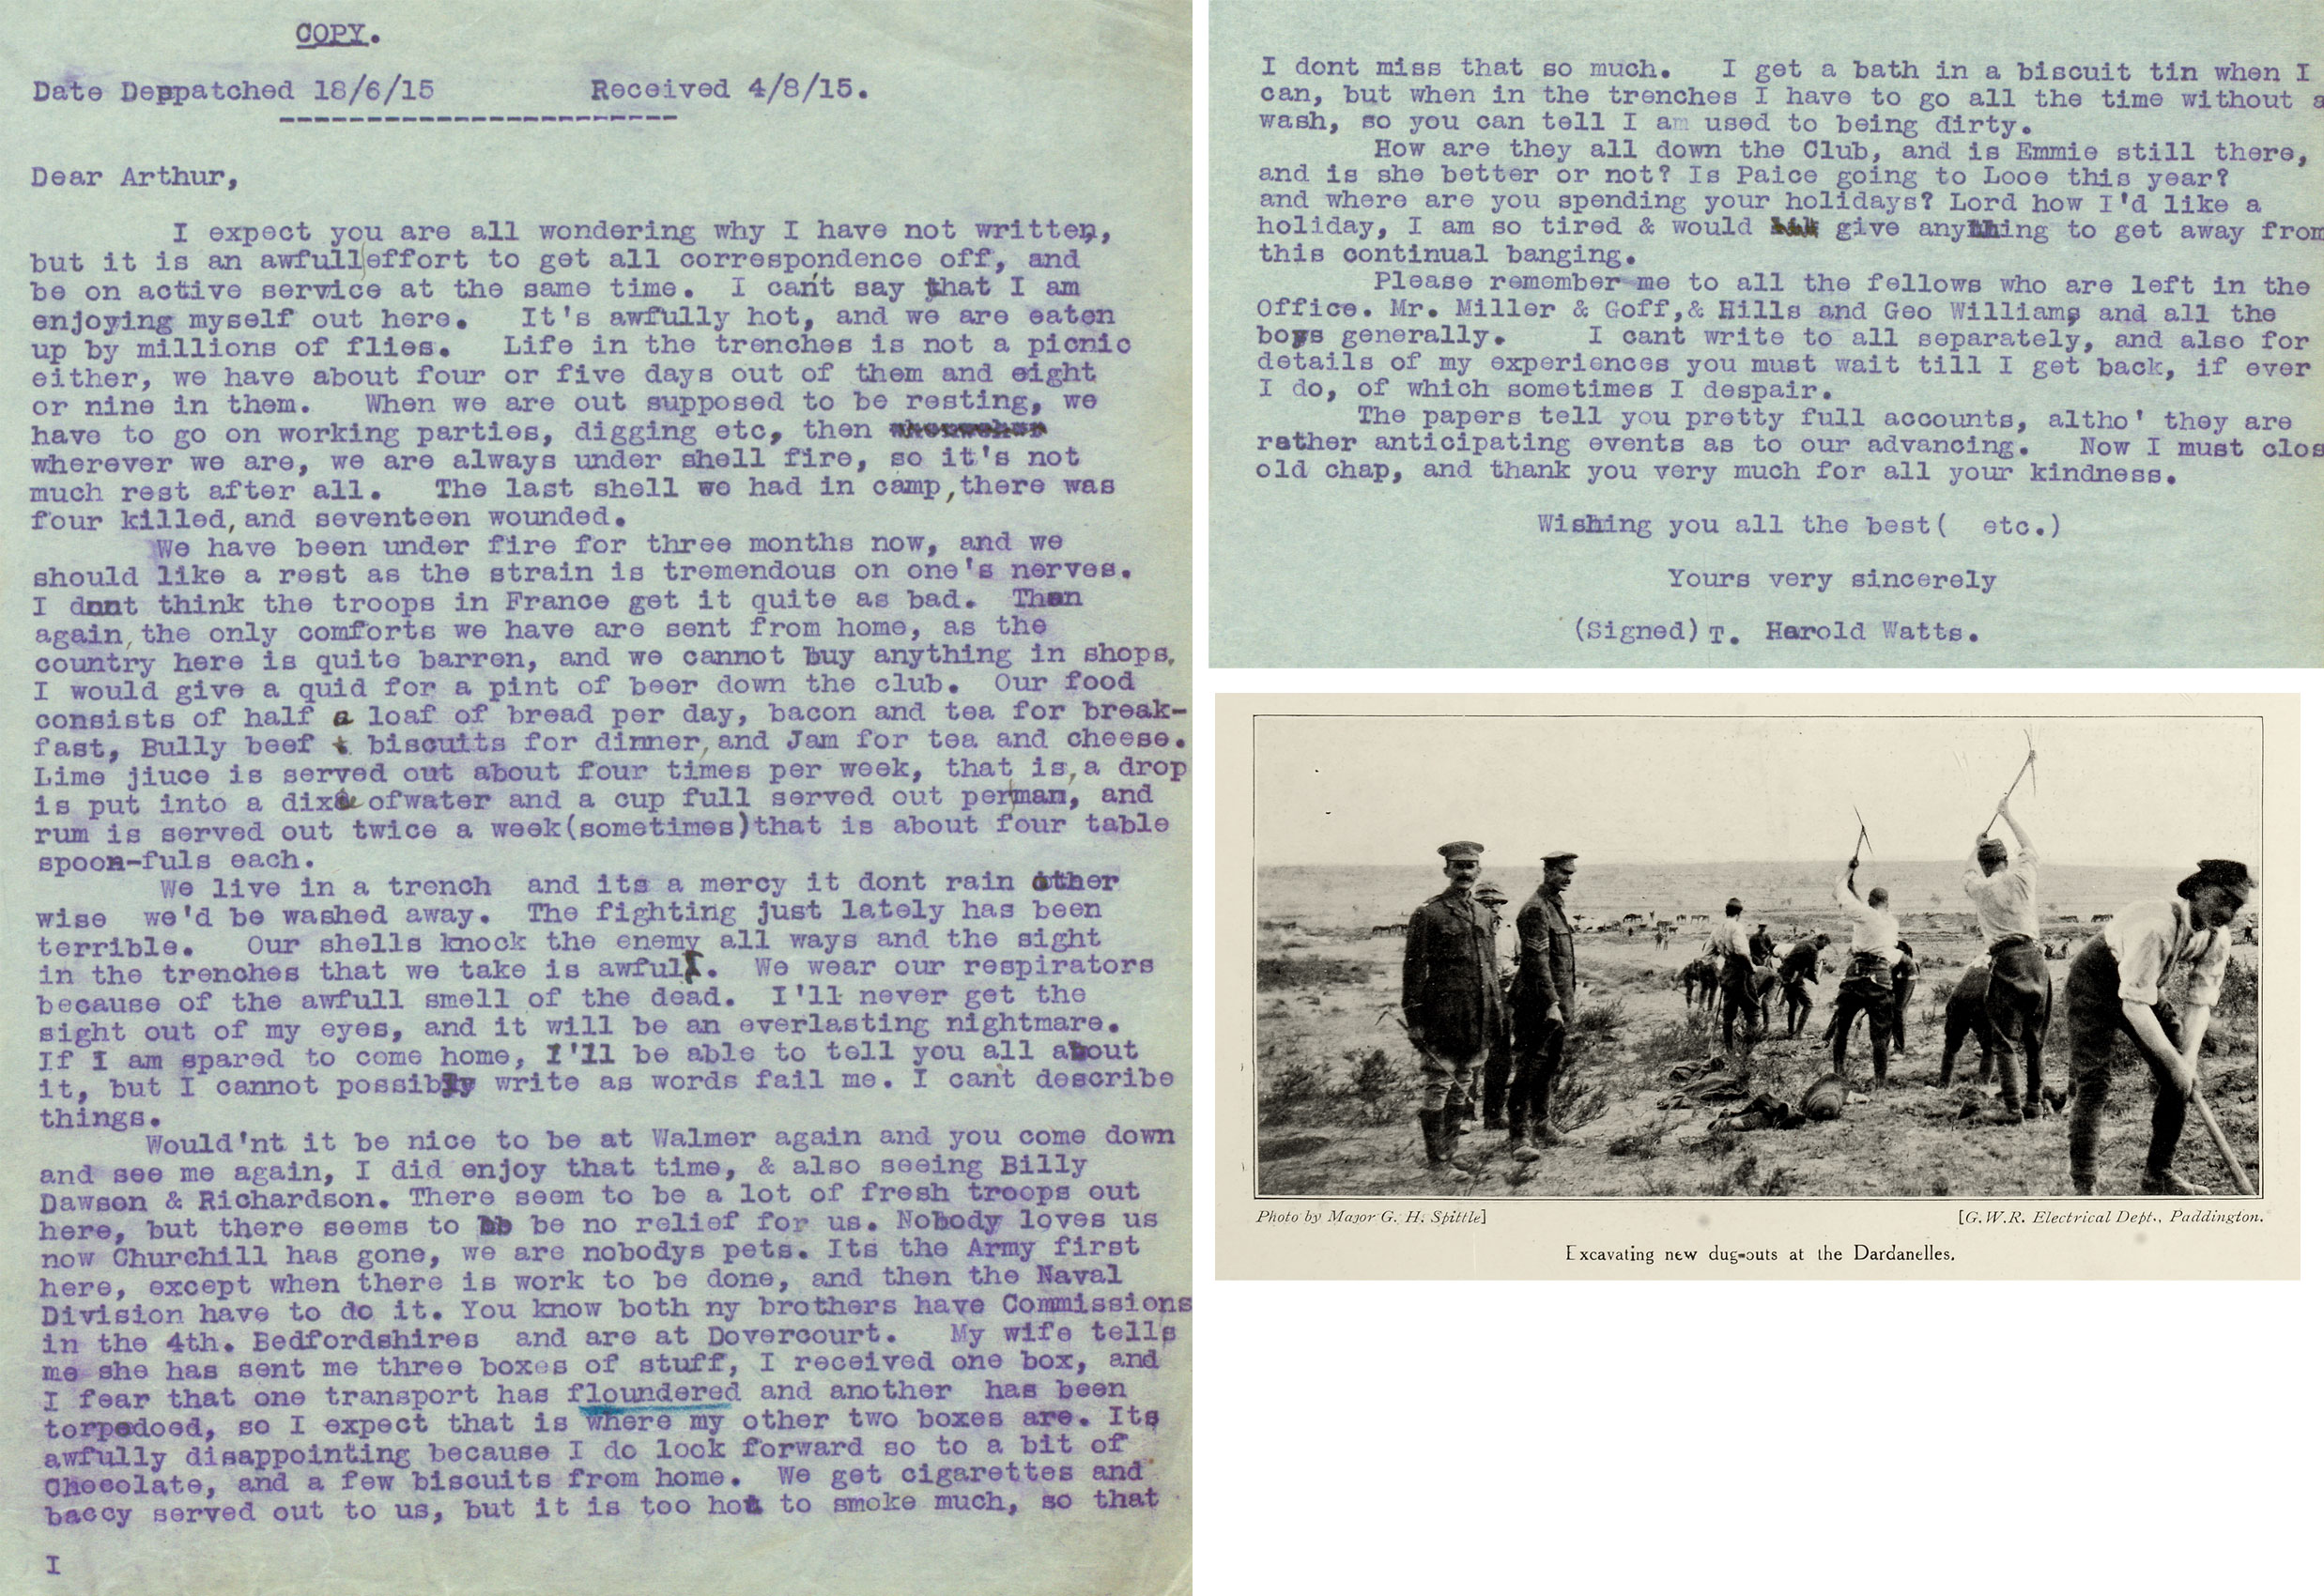 Photo accompanying letter shows men digging into the ground with pickaxes while men in uniform stand next to them.